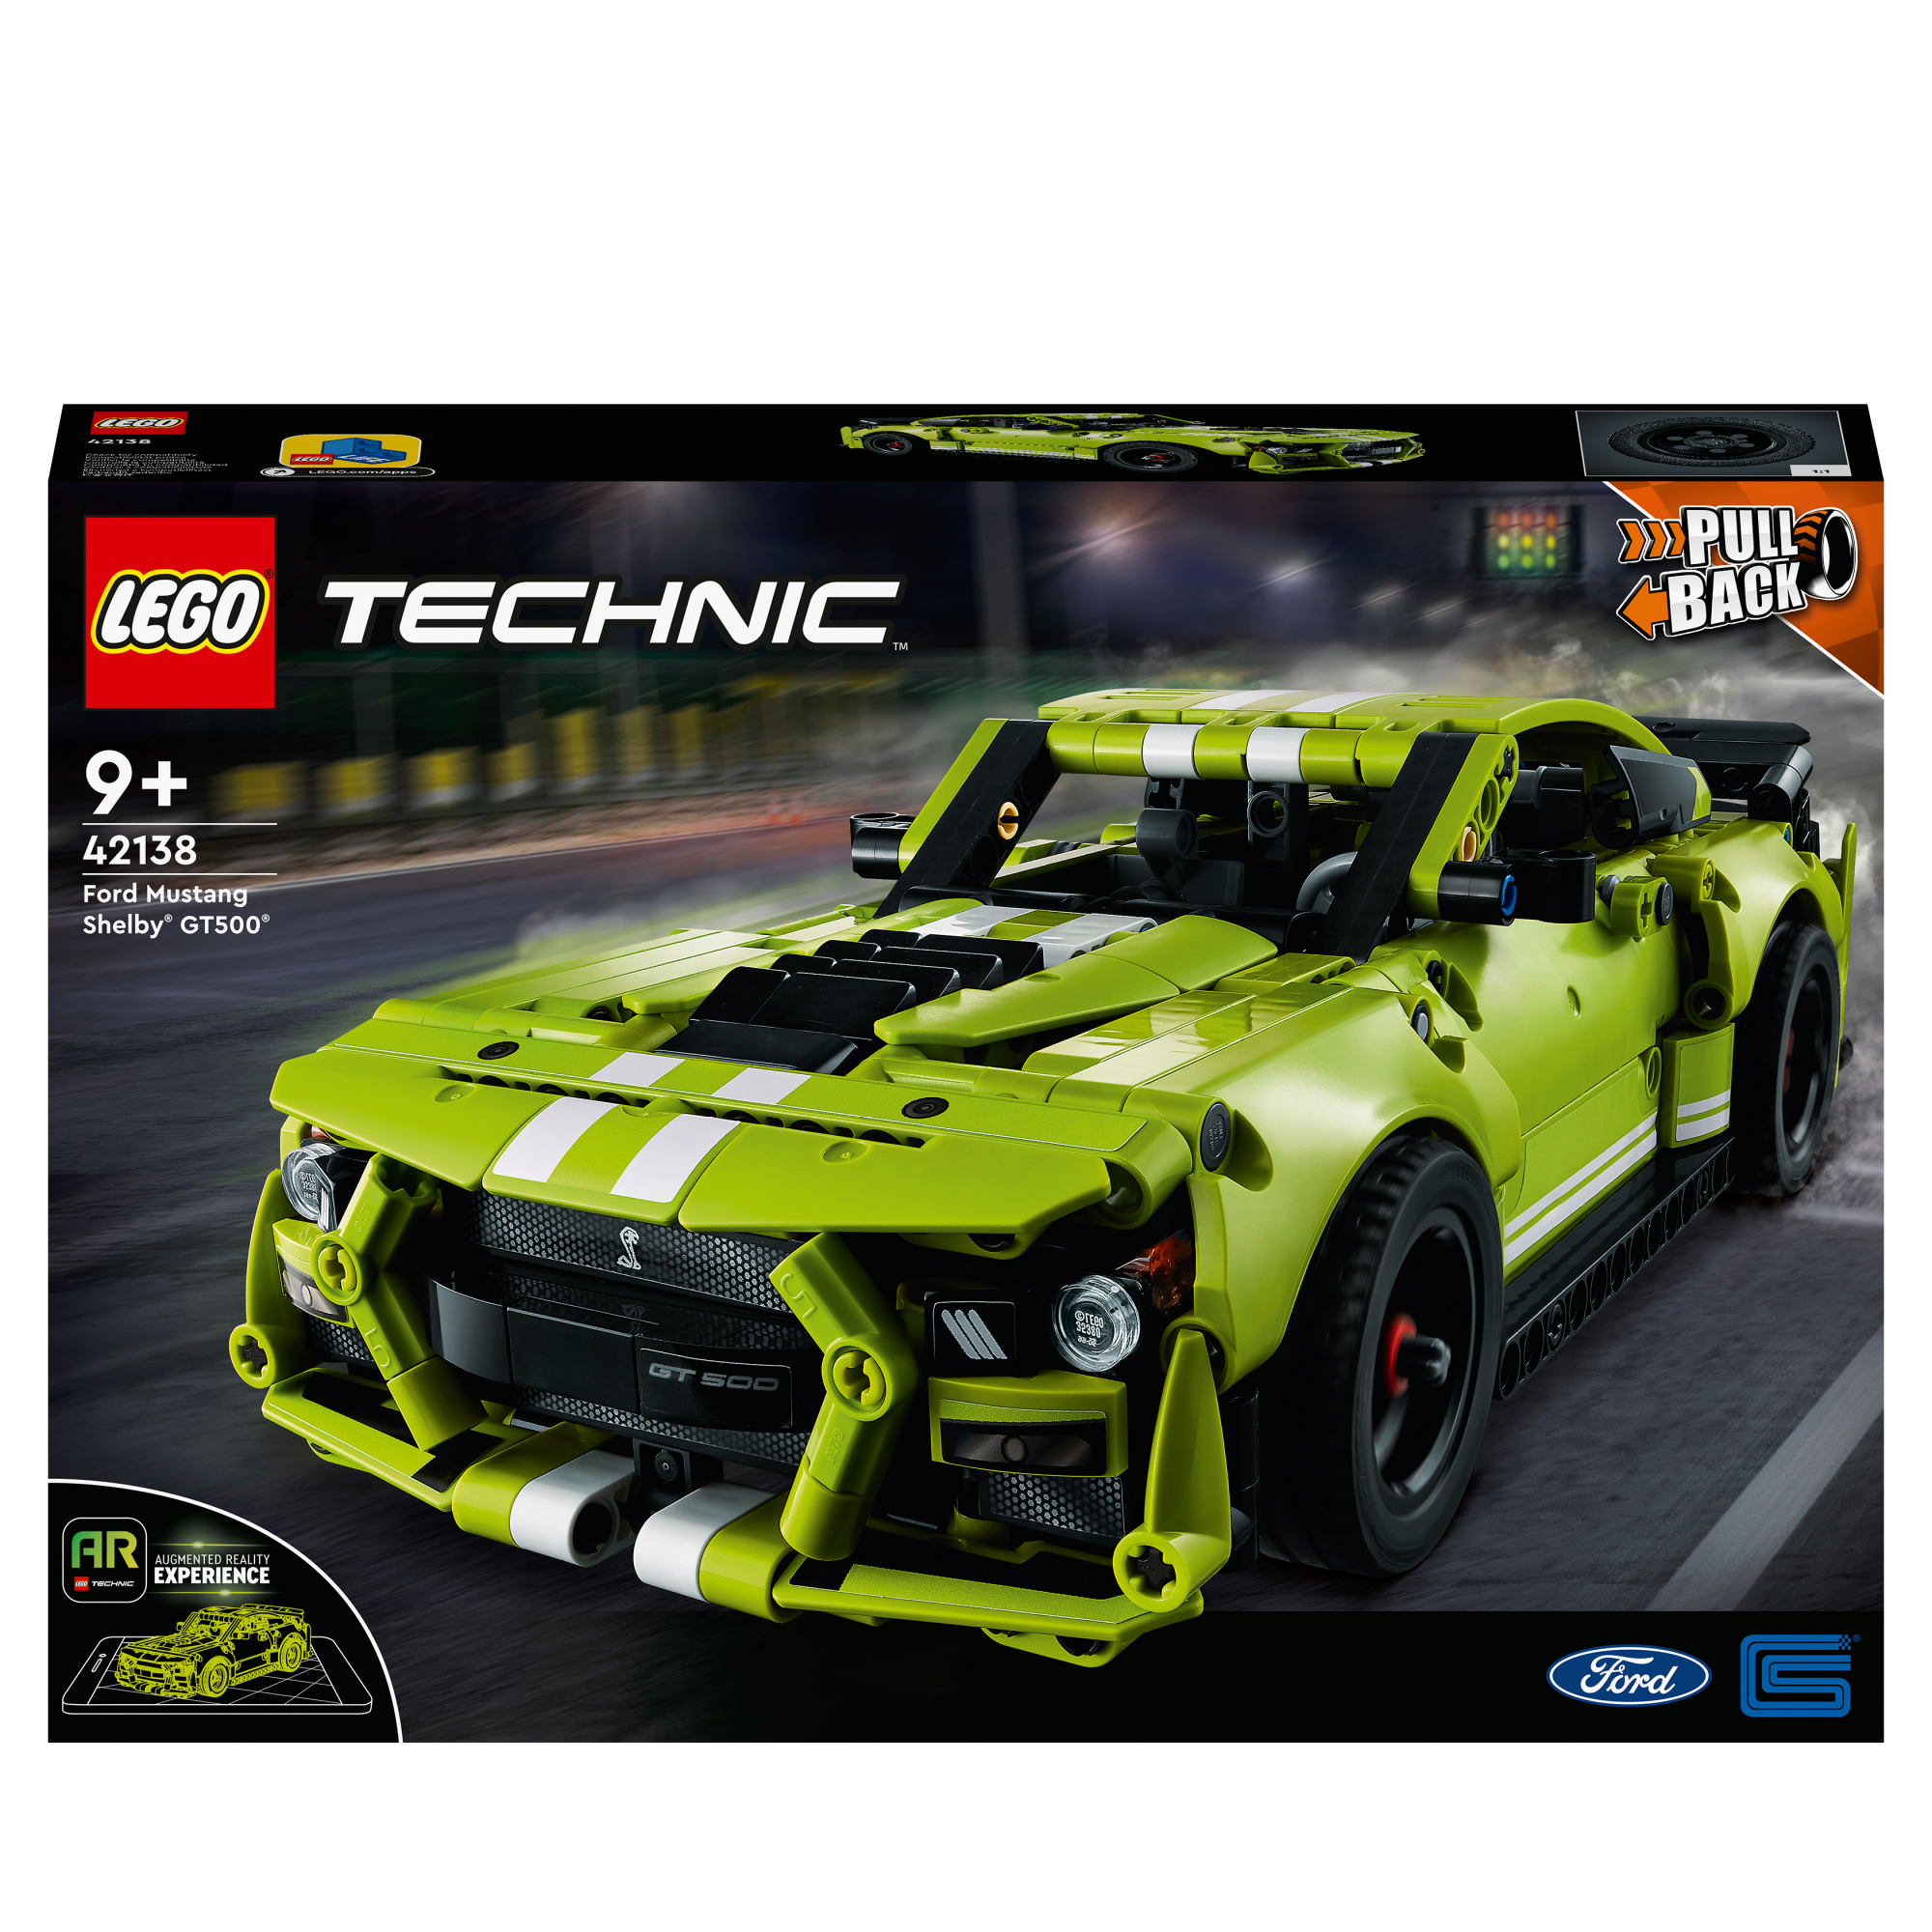 Technic - Ford Mustang Shelby GT500